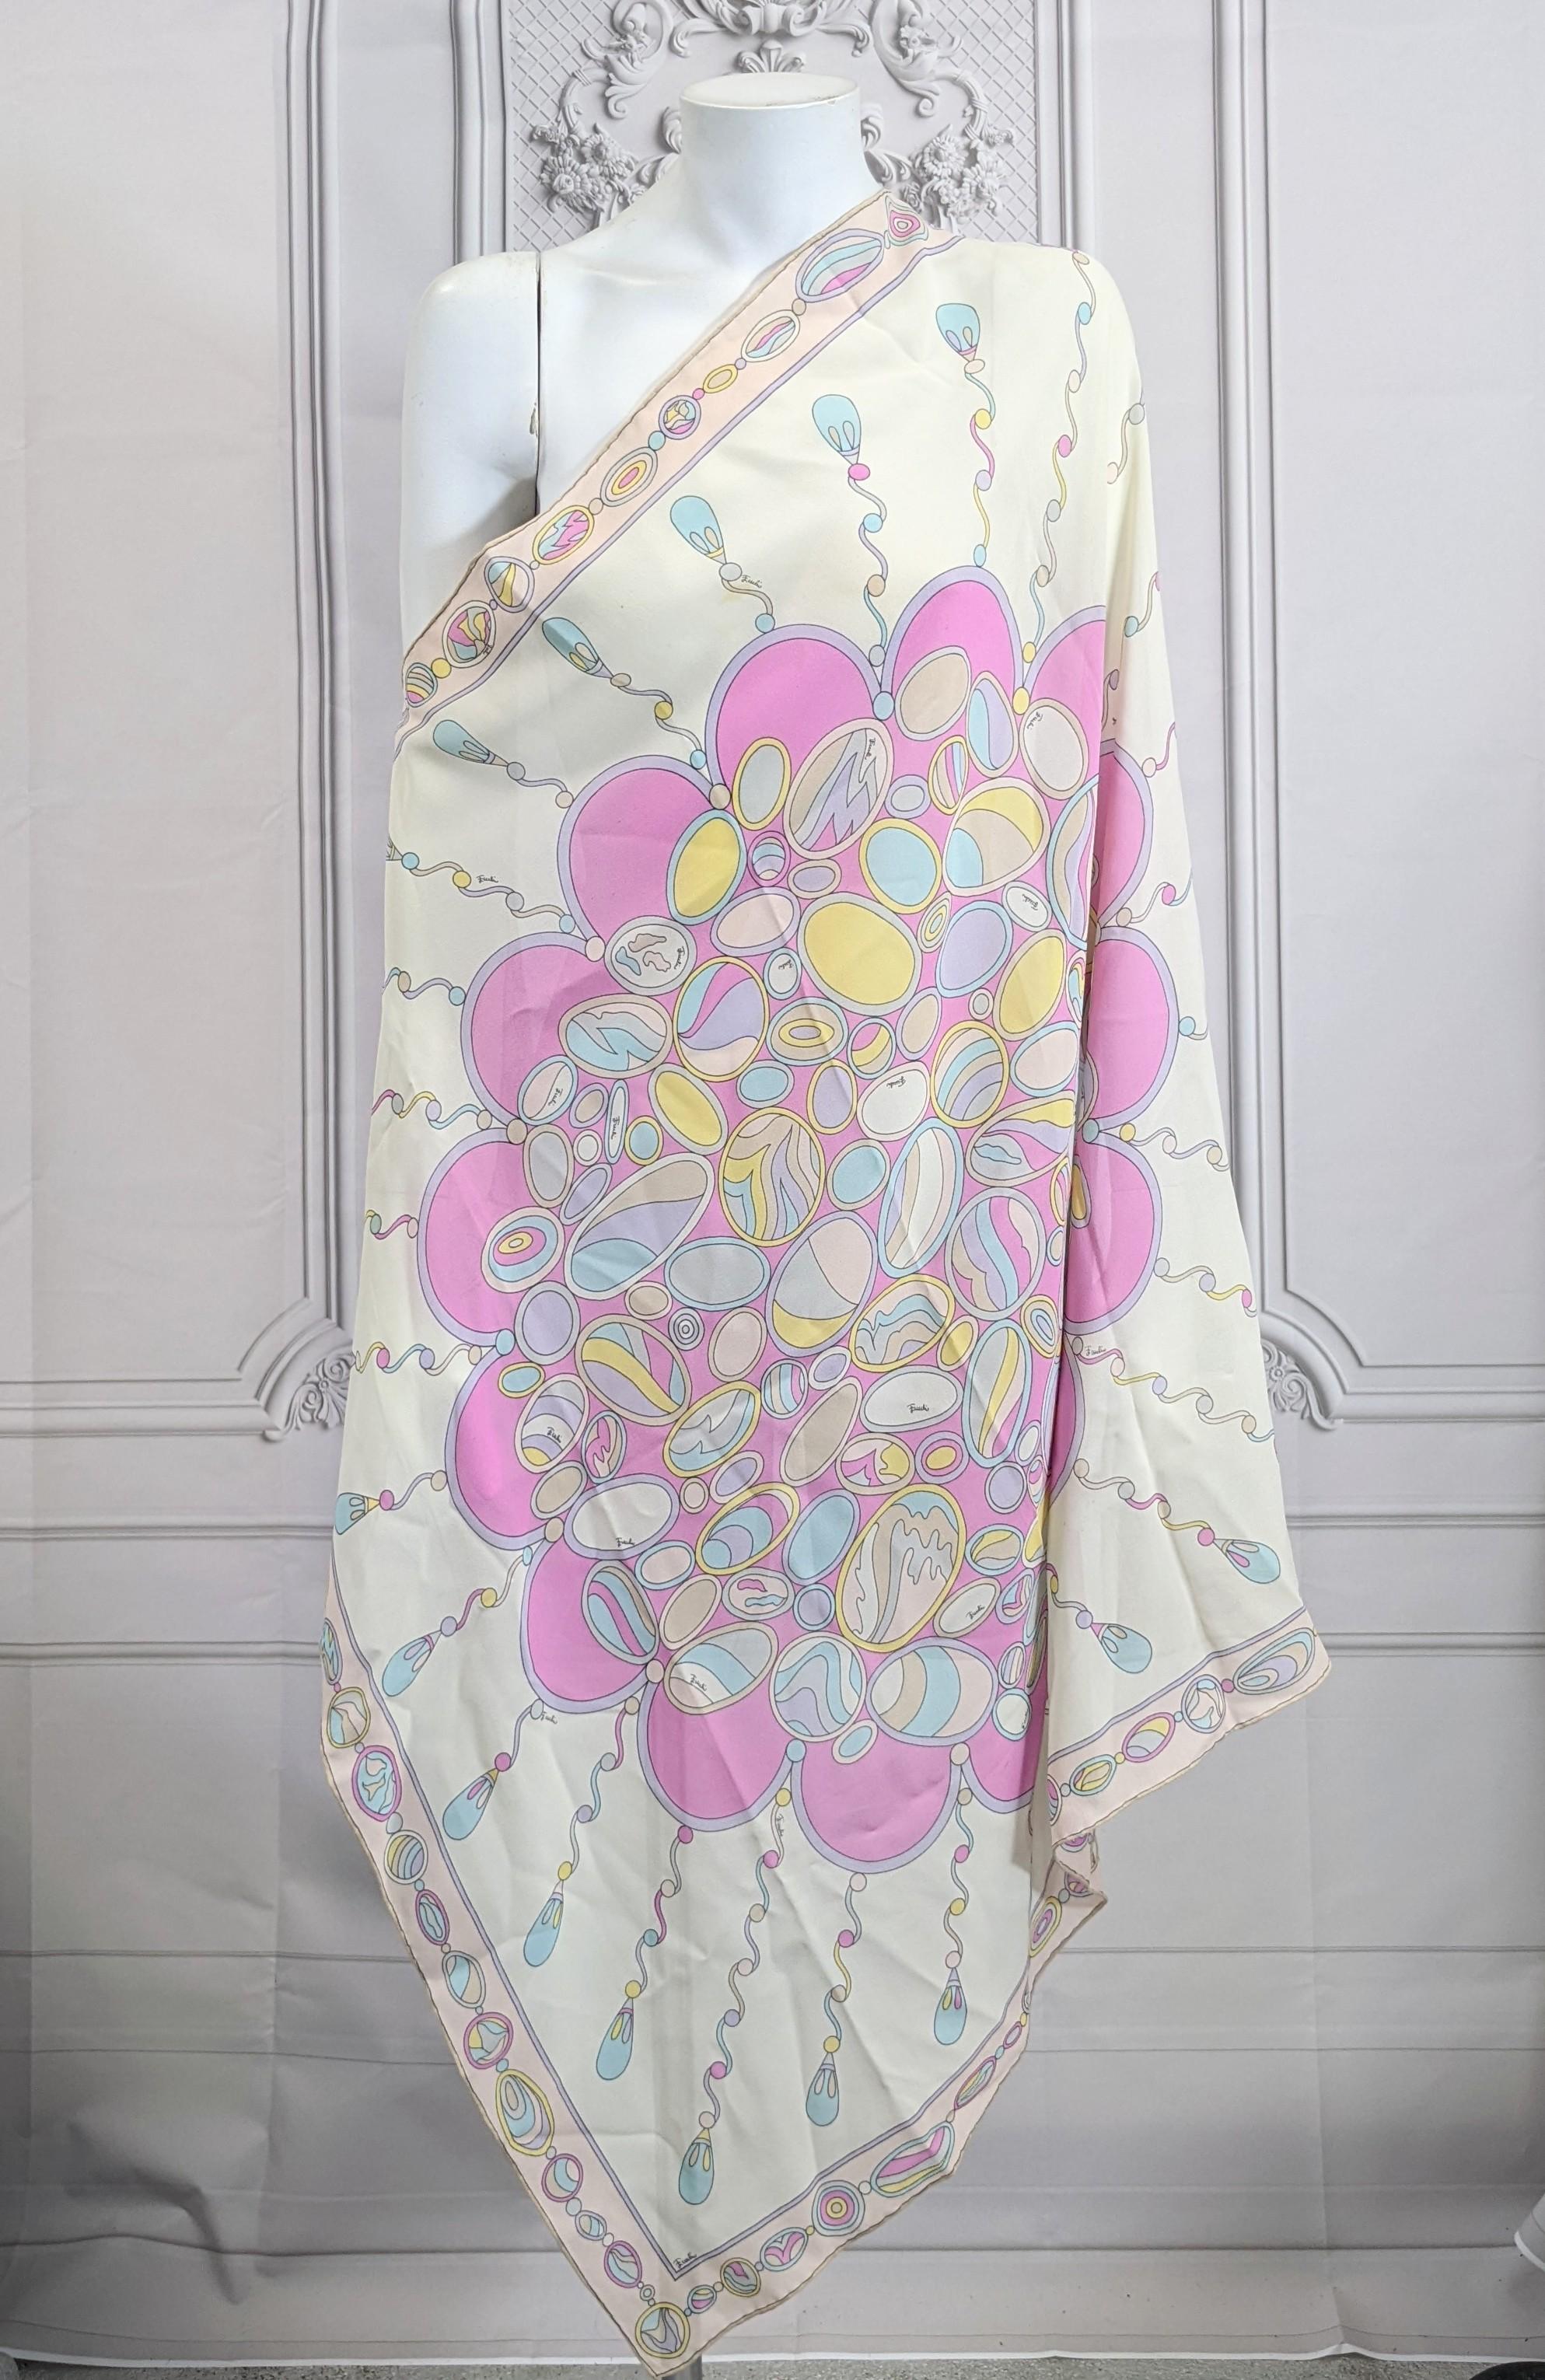 Emilio Pucci large square printed silk chiffon georgette scarf. With an abstract flower head motif print composed of modernist gemstone ovals with tendrils of linked beads and pearl teardrops printed in varied muted shades of mauves, blues, and